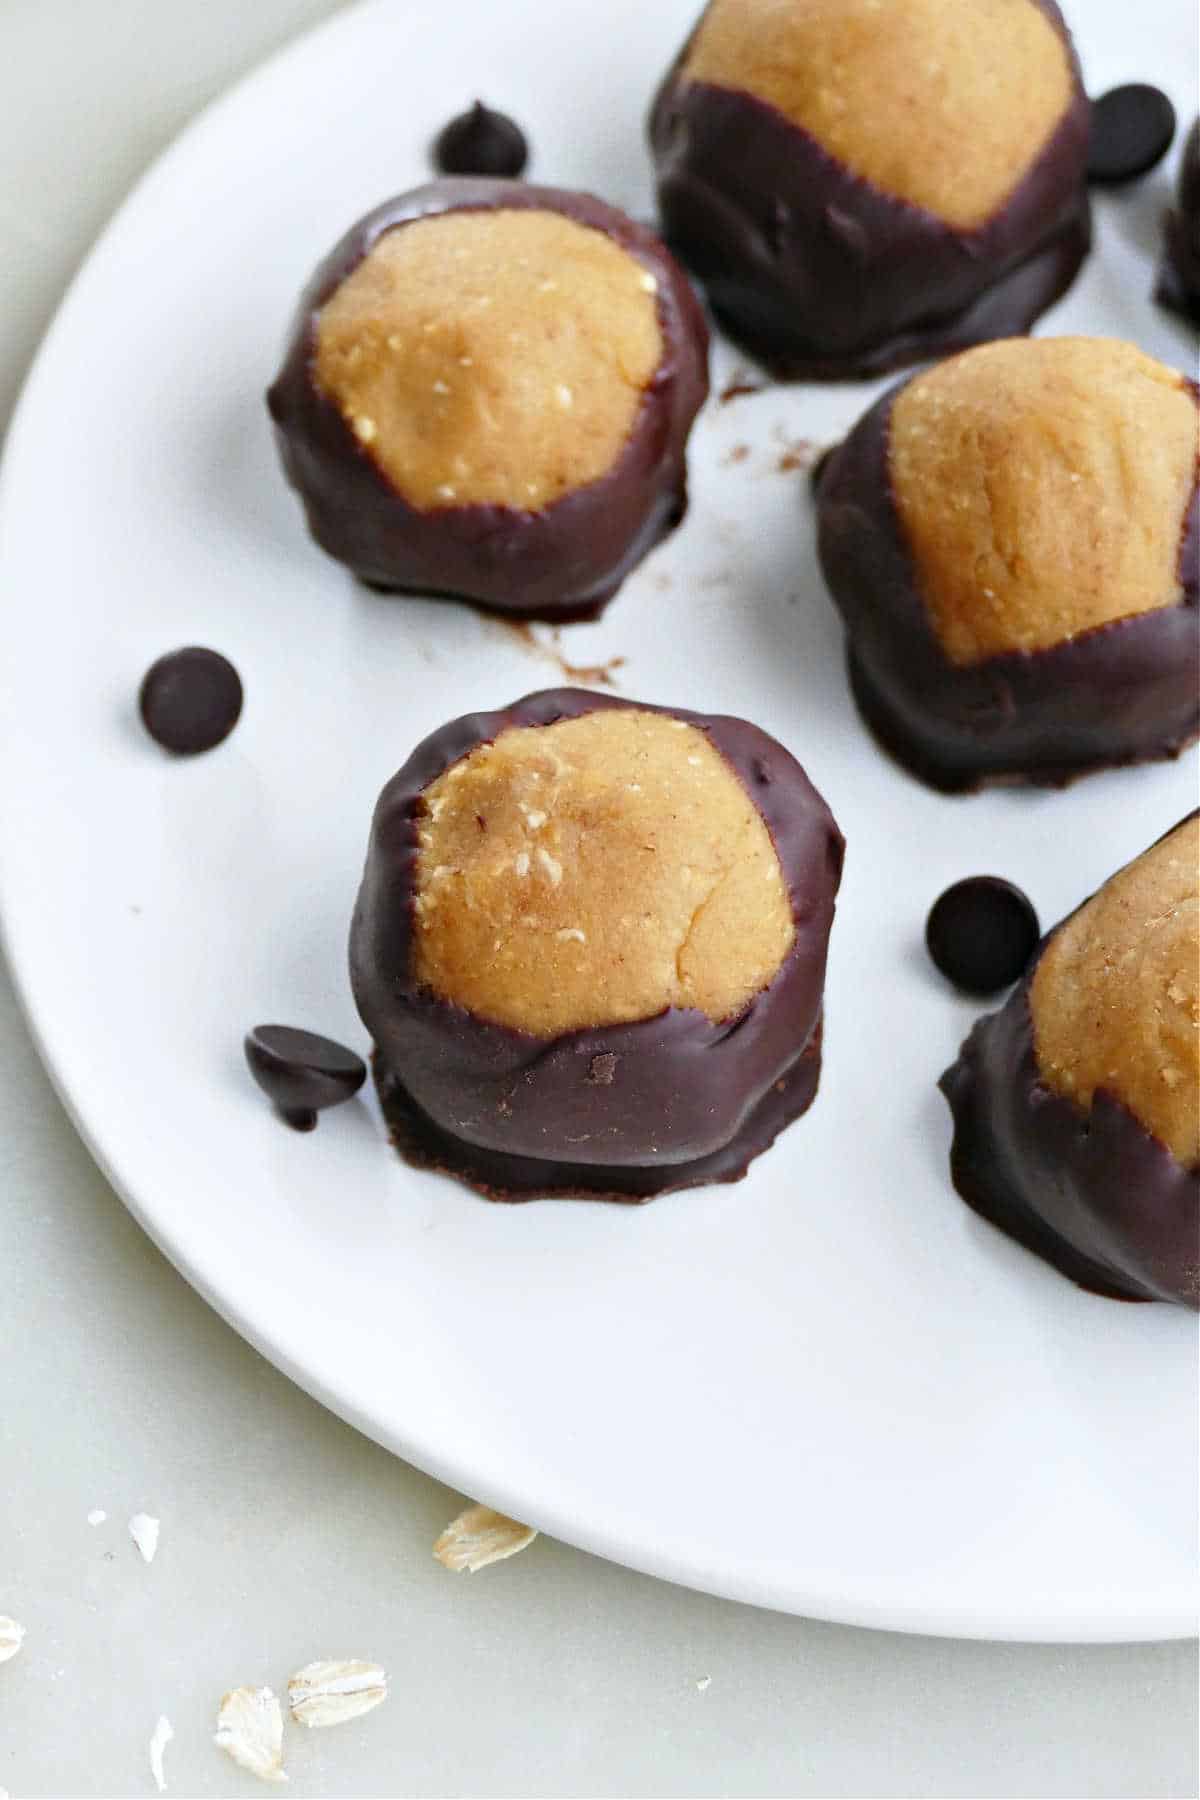 vegan buckeyes coated in chocolate on a plate with chocolate chips